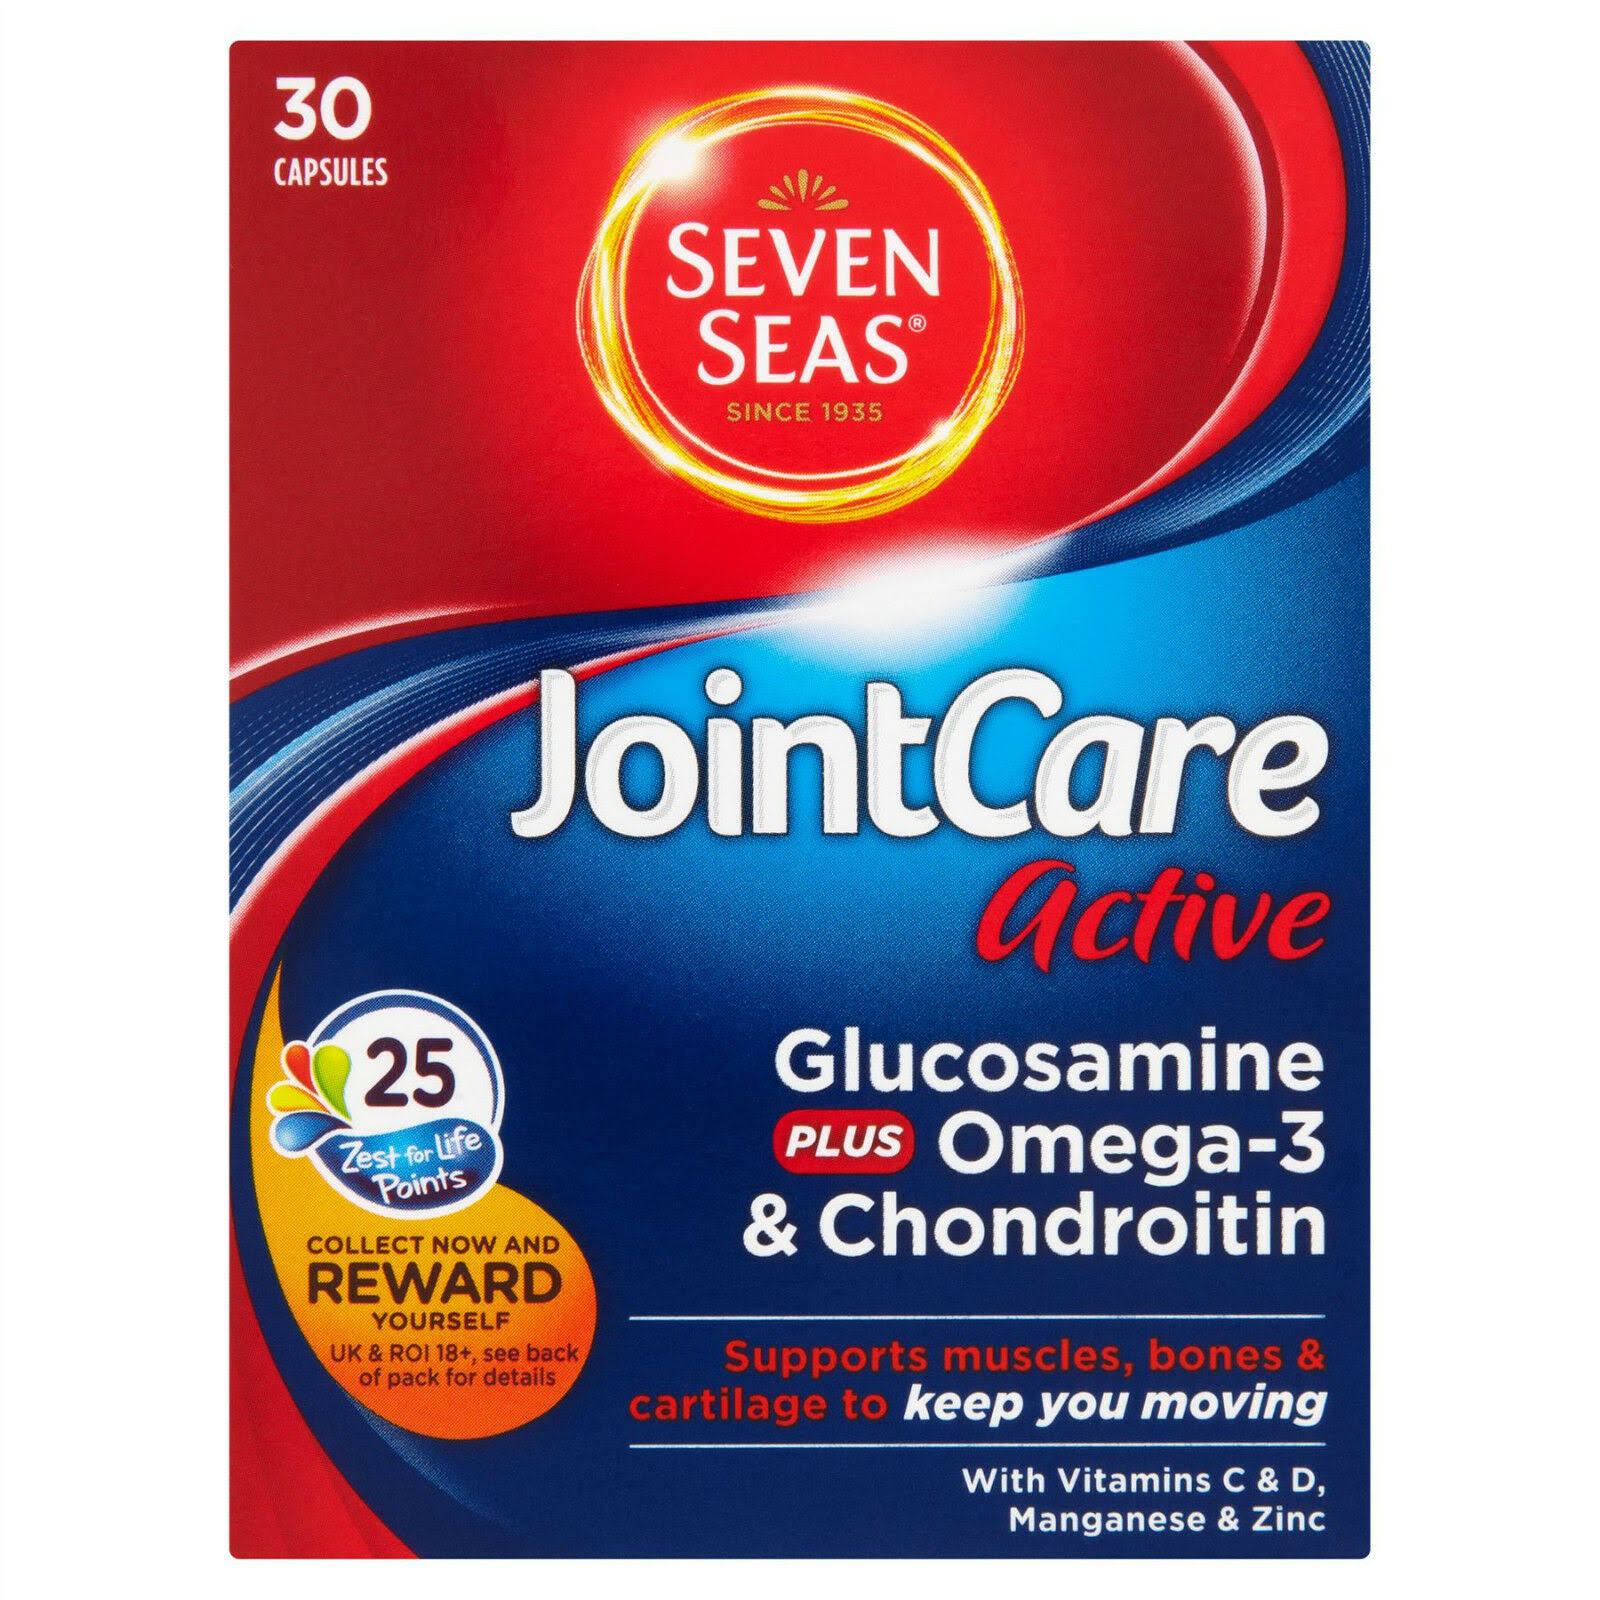 Seven Seas Jointcare Active Capsules - 30ct